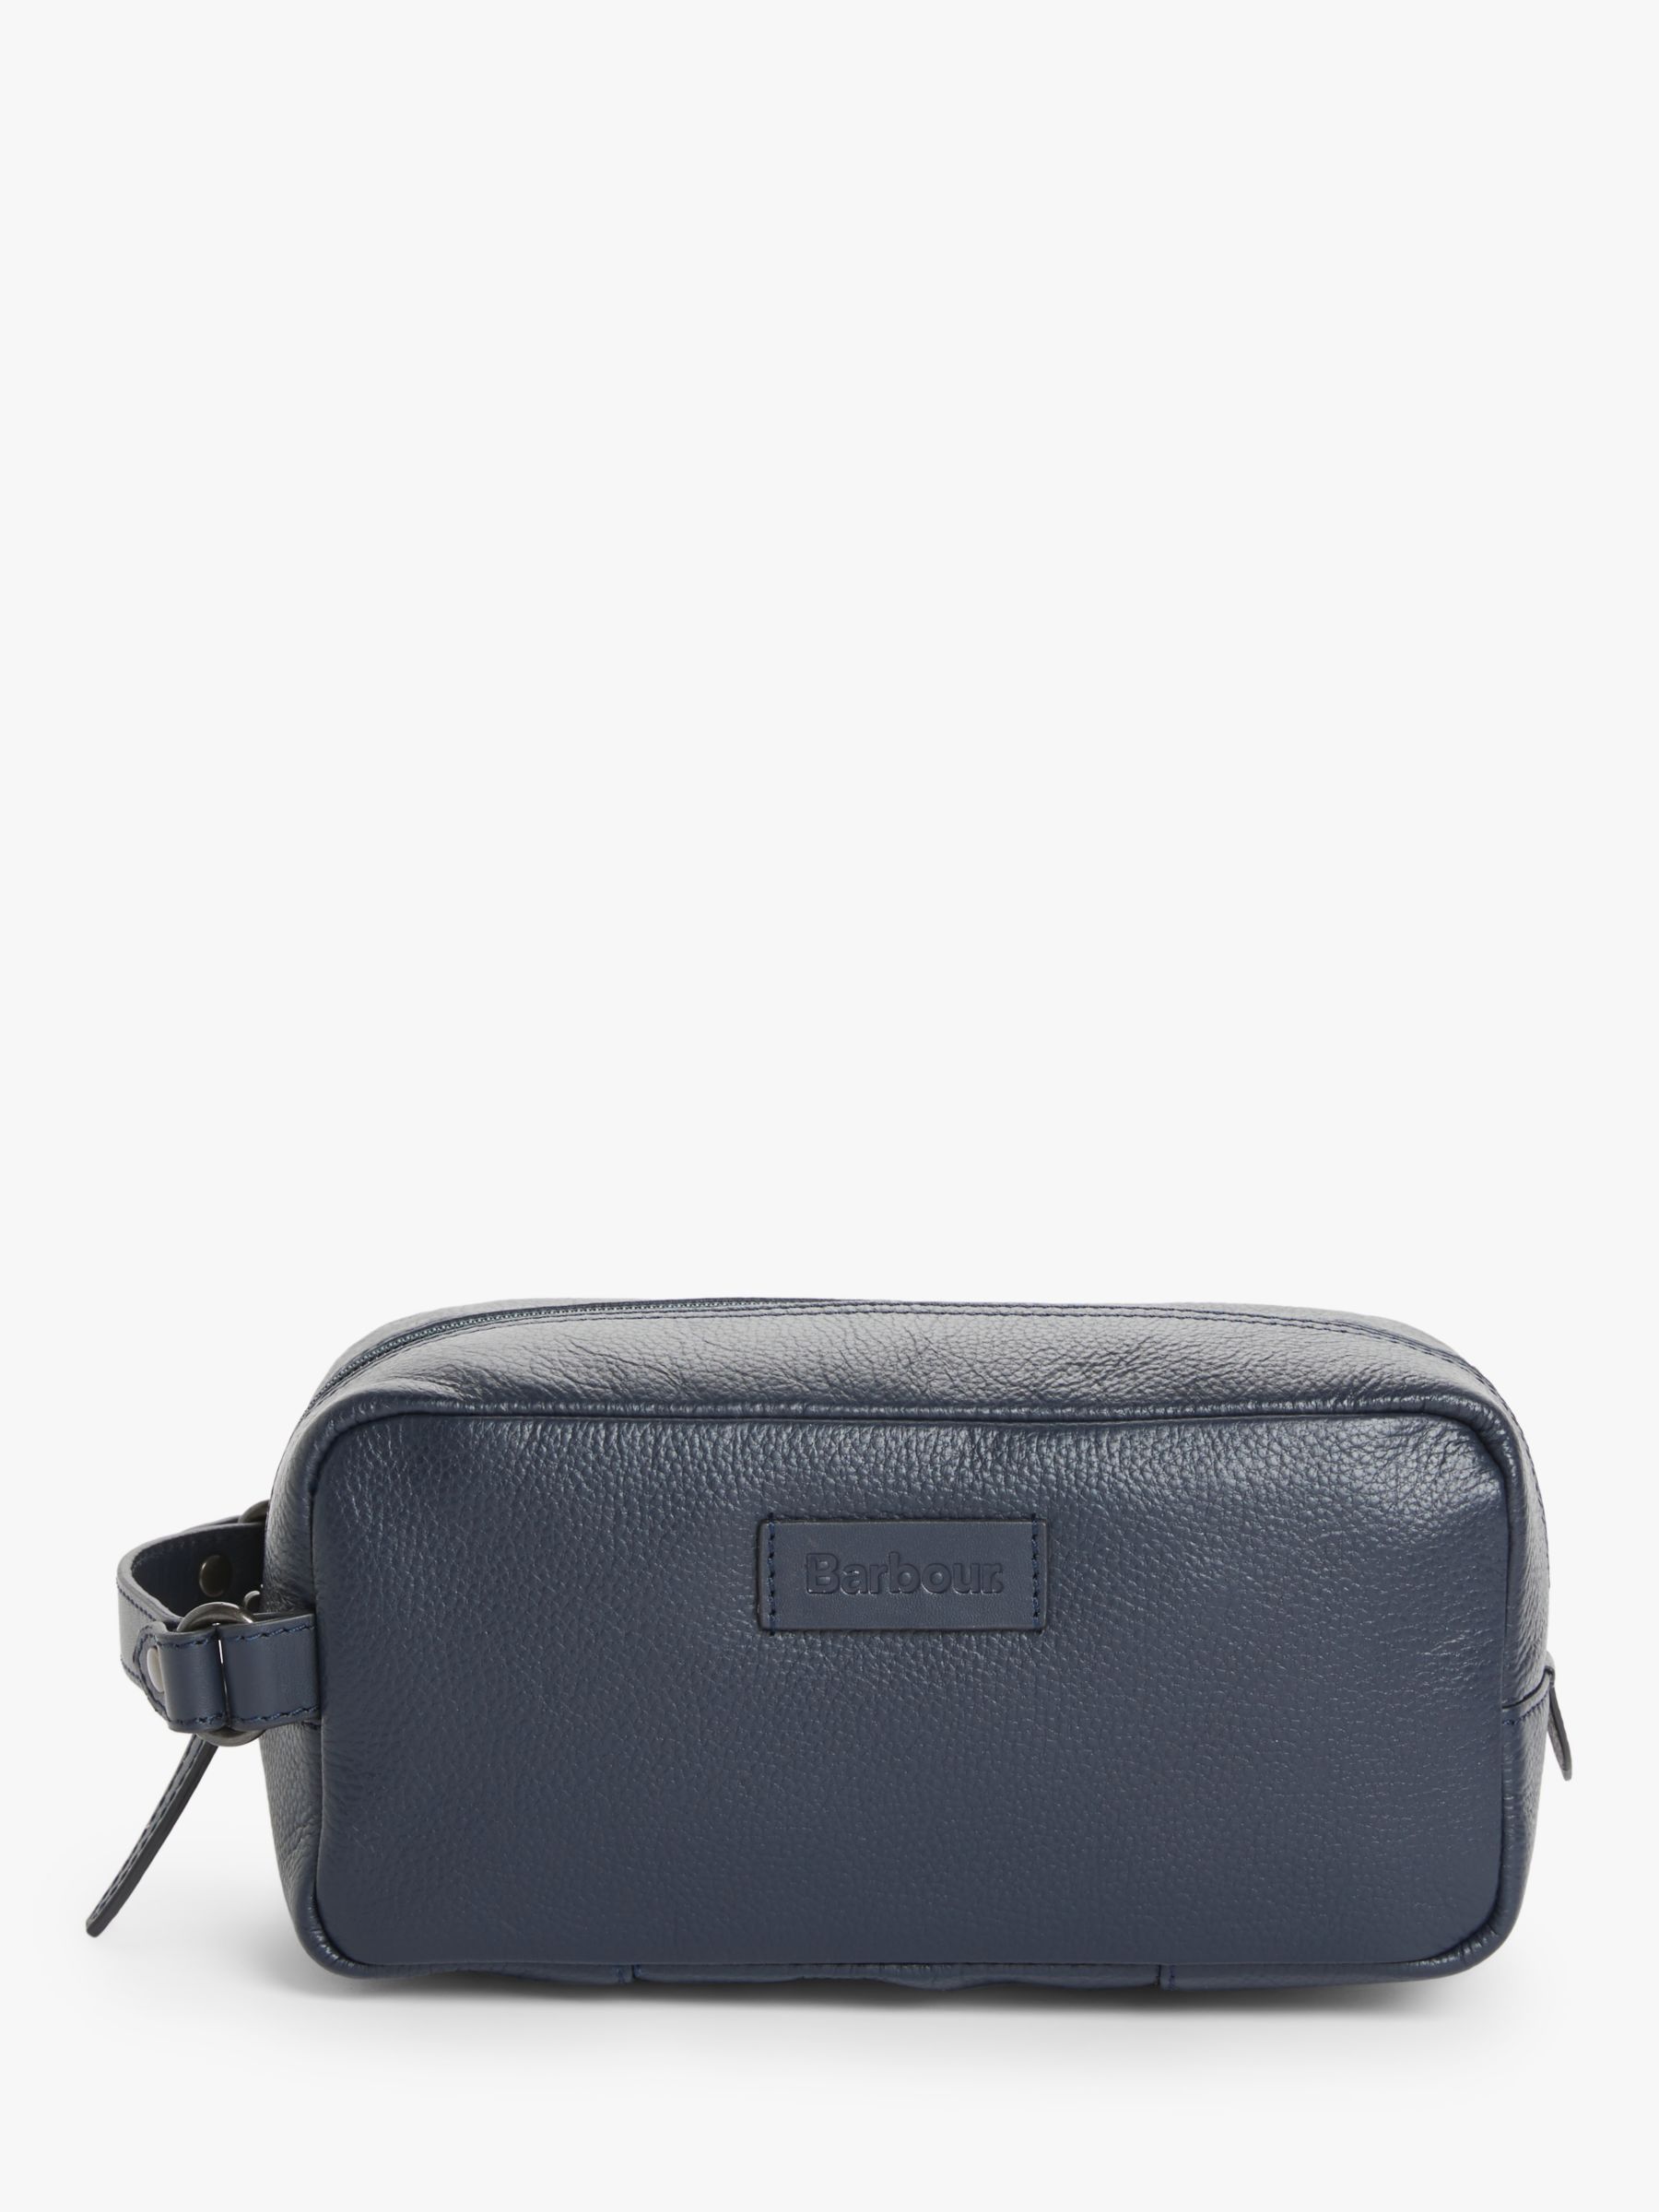 Barbour Compact Leather Wash Bag, Navy at John Lewis & Partners